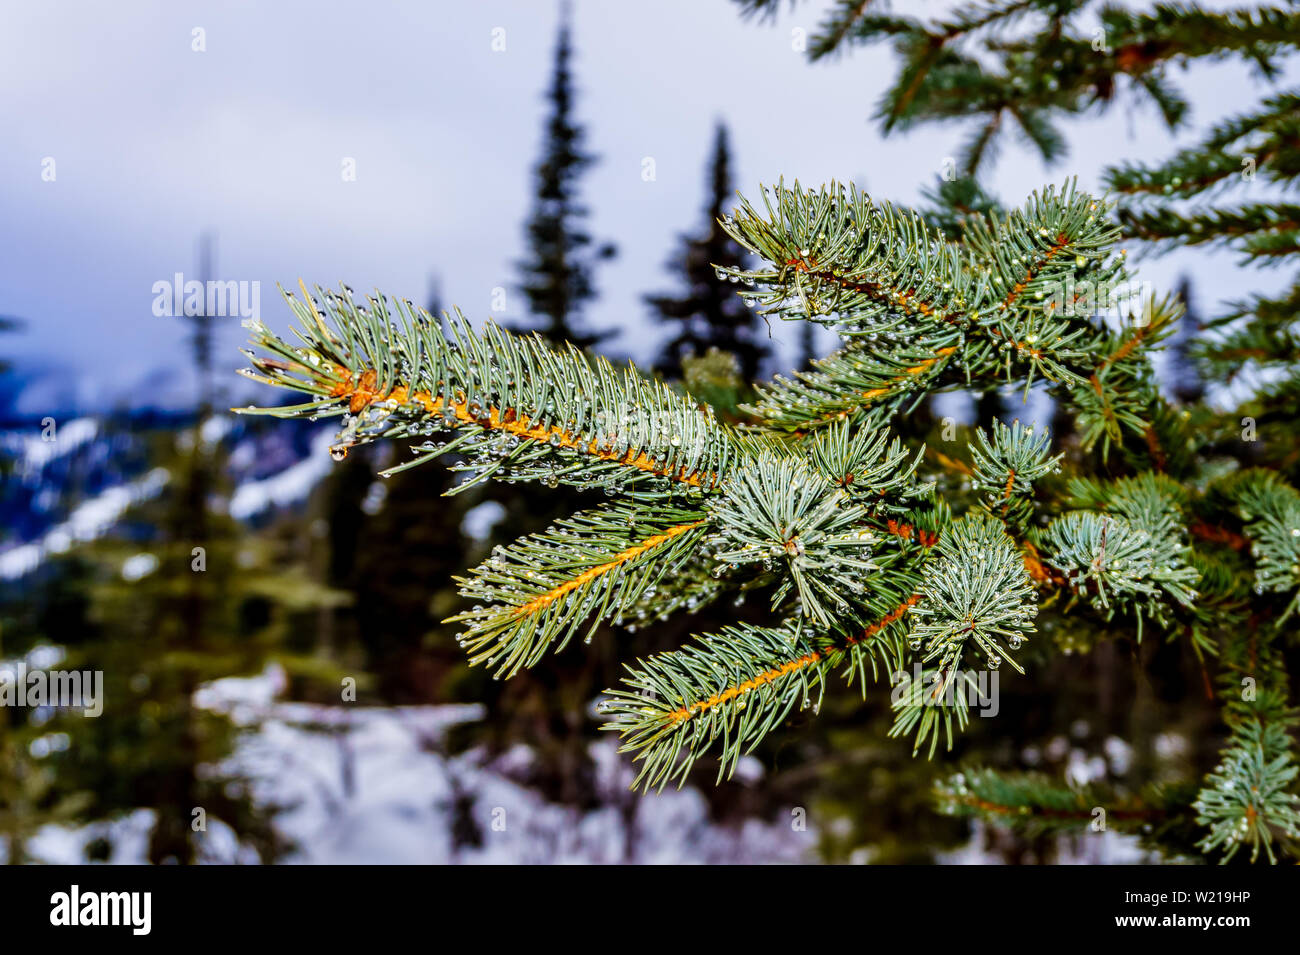 One of the many evergreen trees in the Alpine Village of Sun Peaks in beautiful British Columbia, Canada Stock Photo